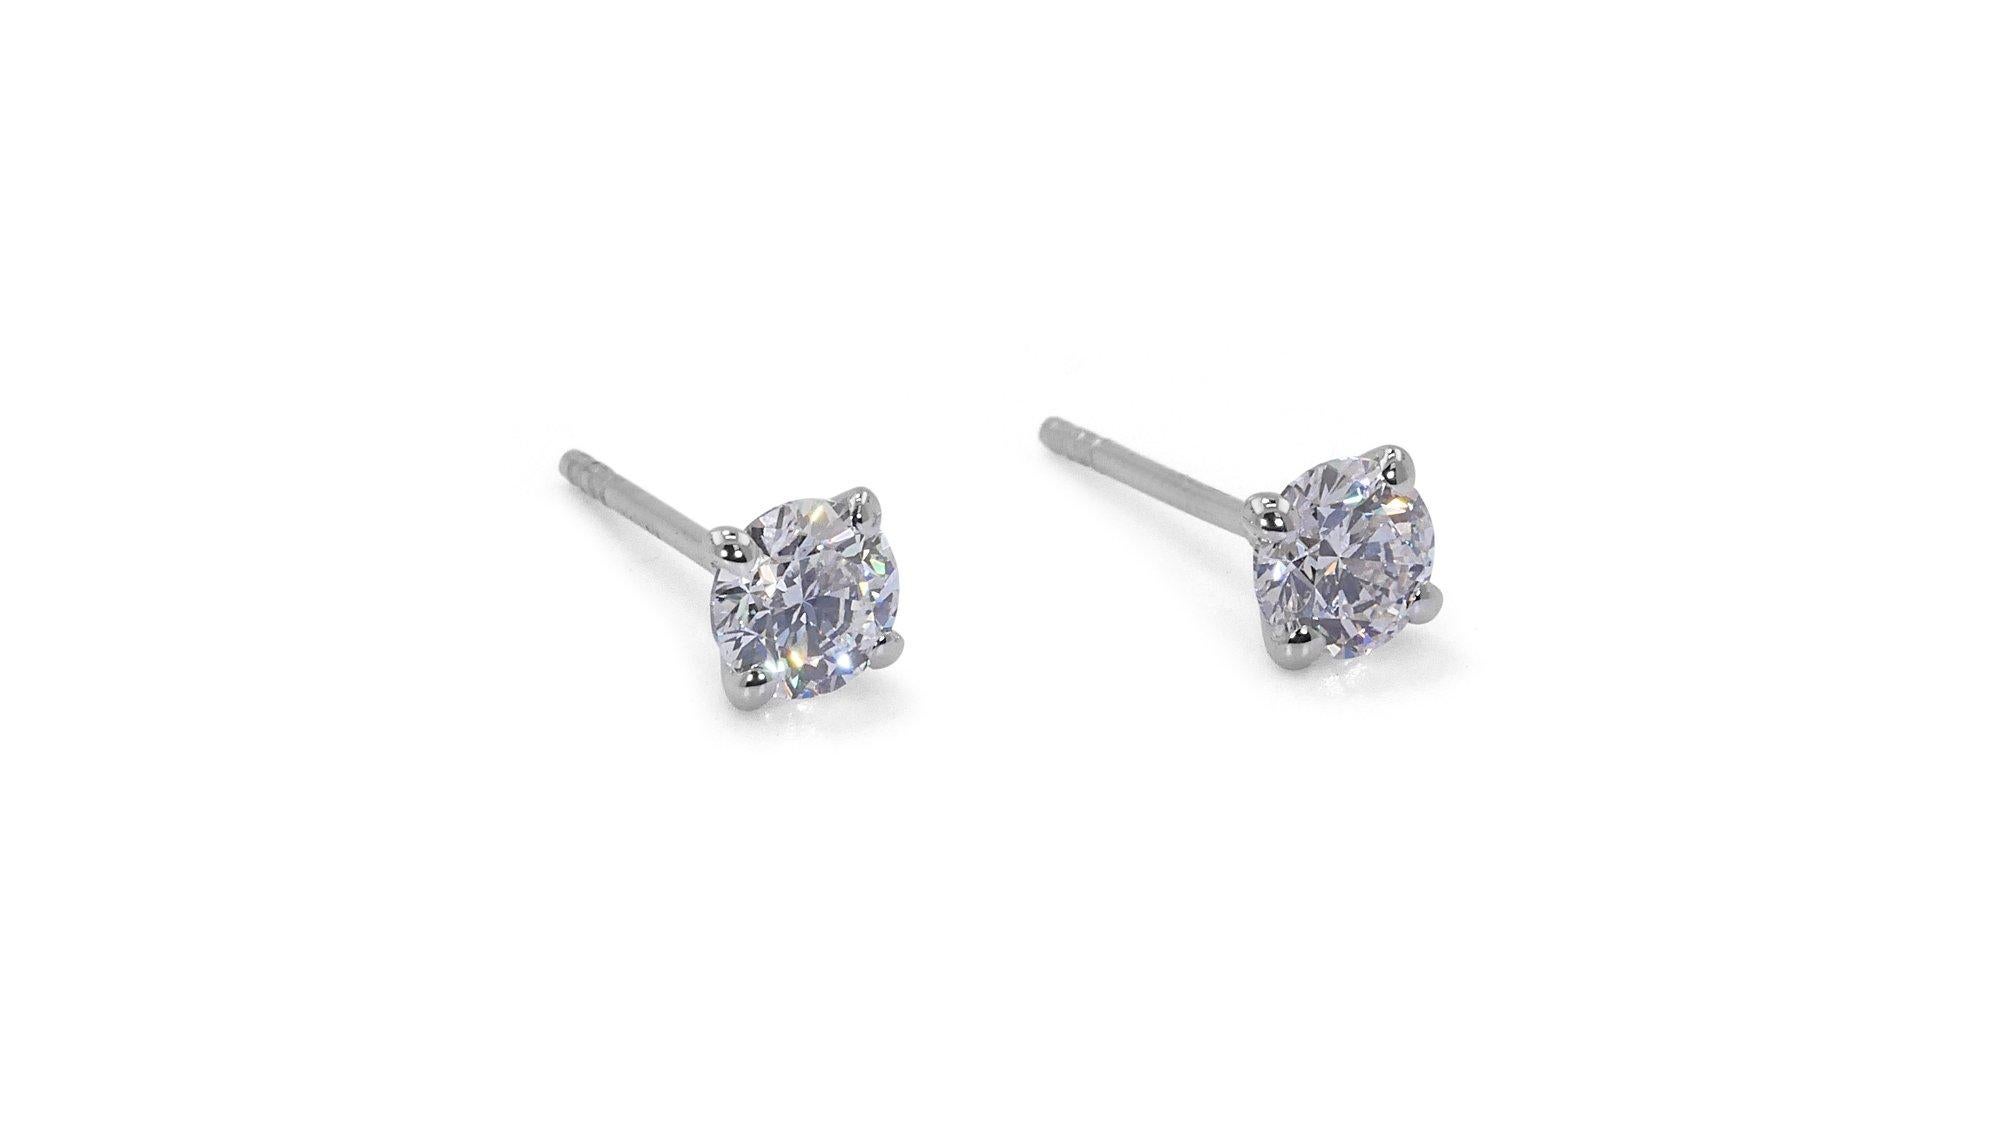 Stunning 18k White Gold Stud Earrings with 0.80 Ct Natural Diamonds GIA Cert For Sale 1